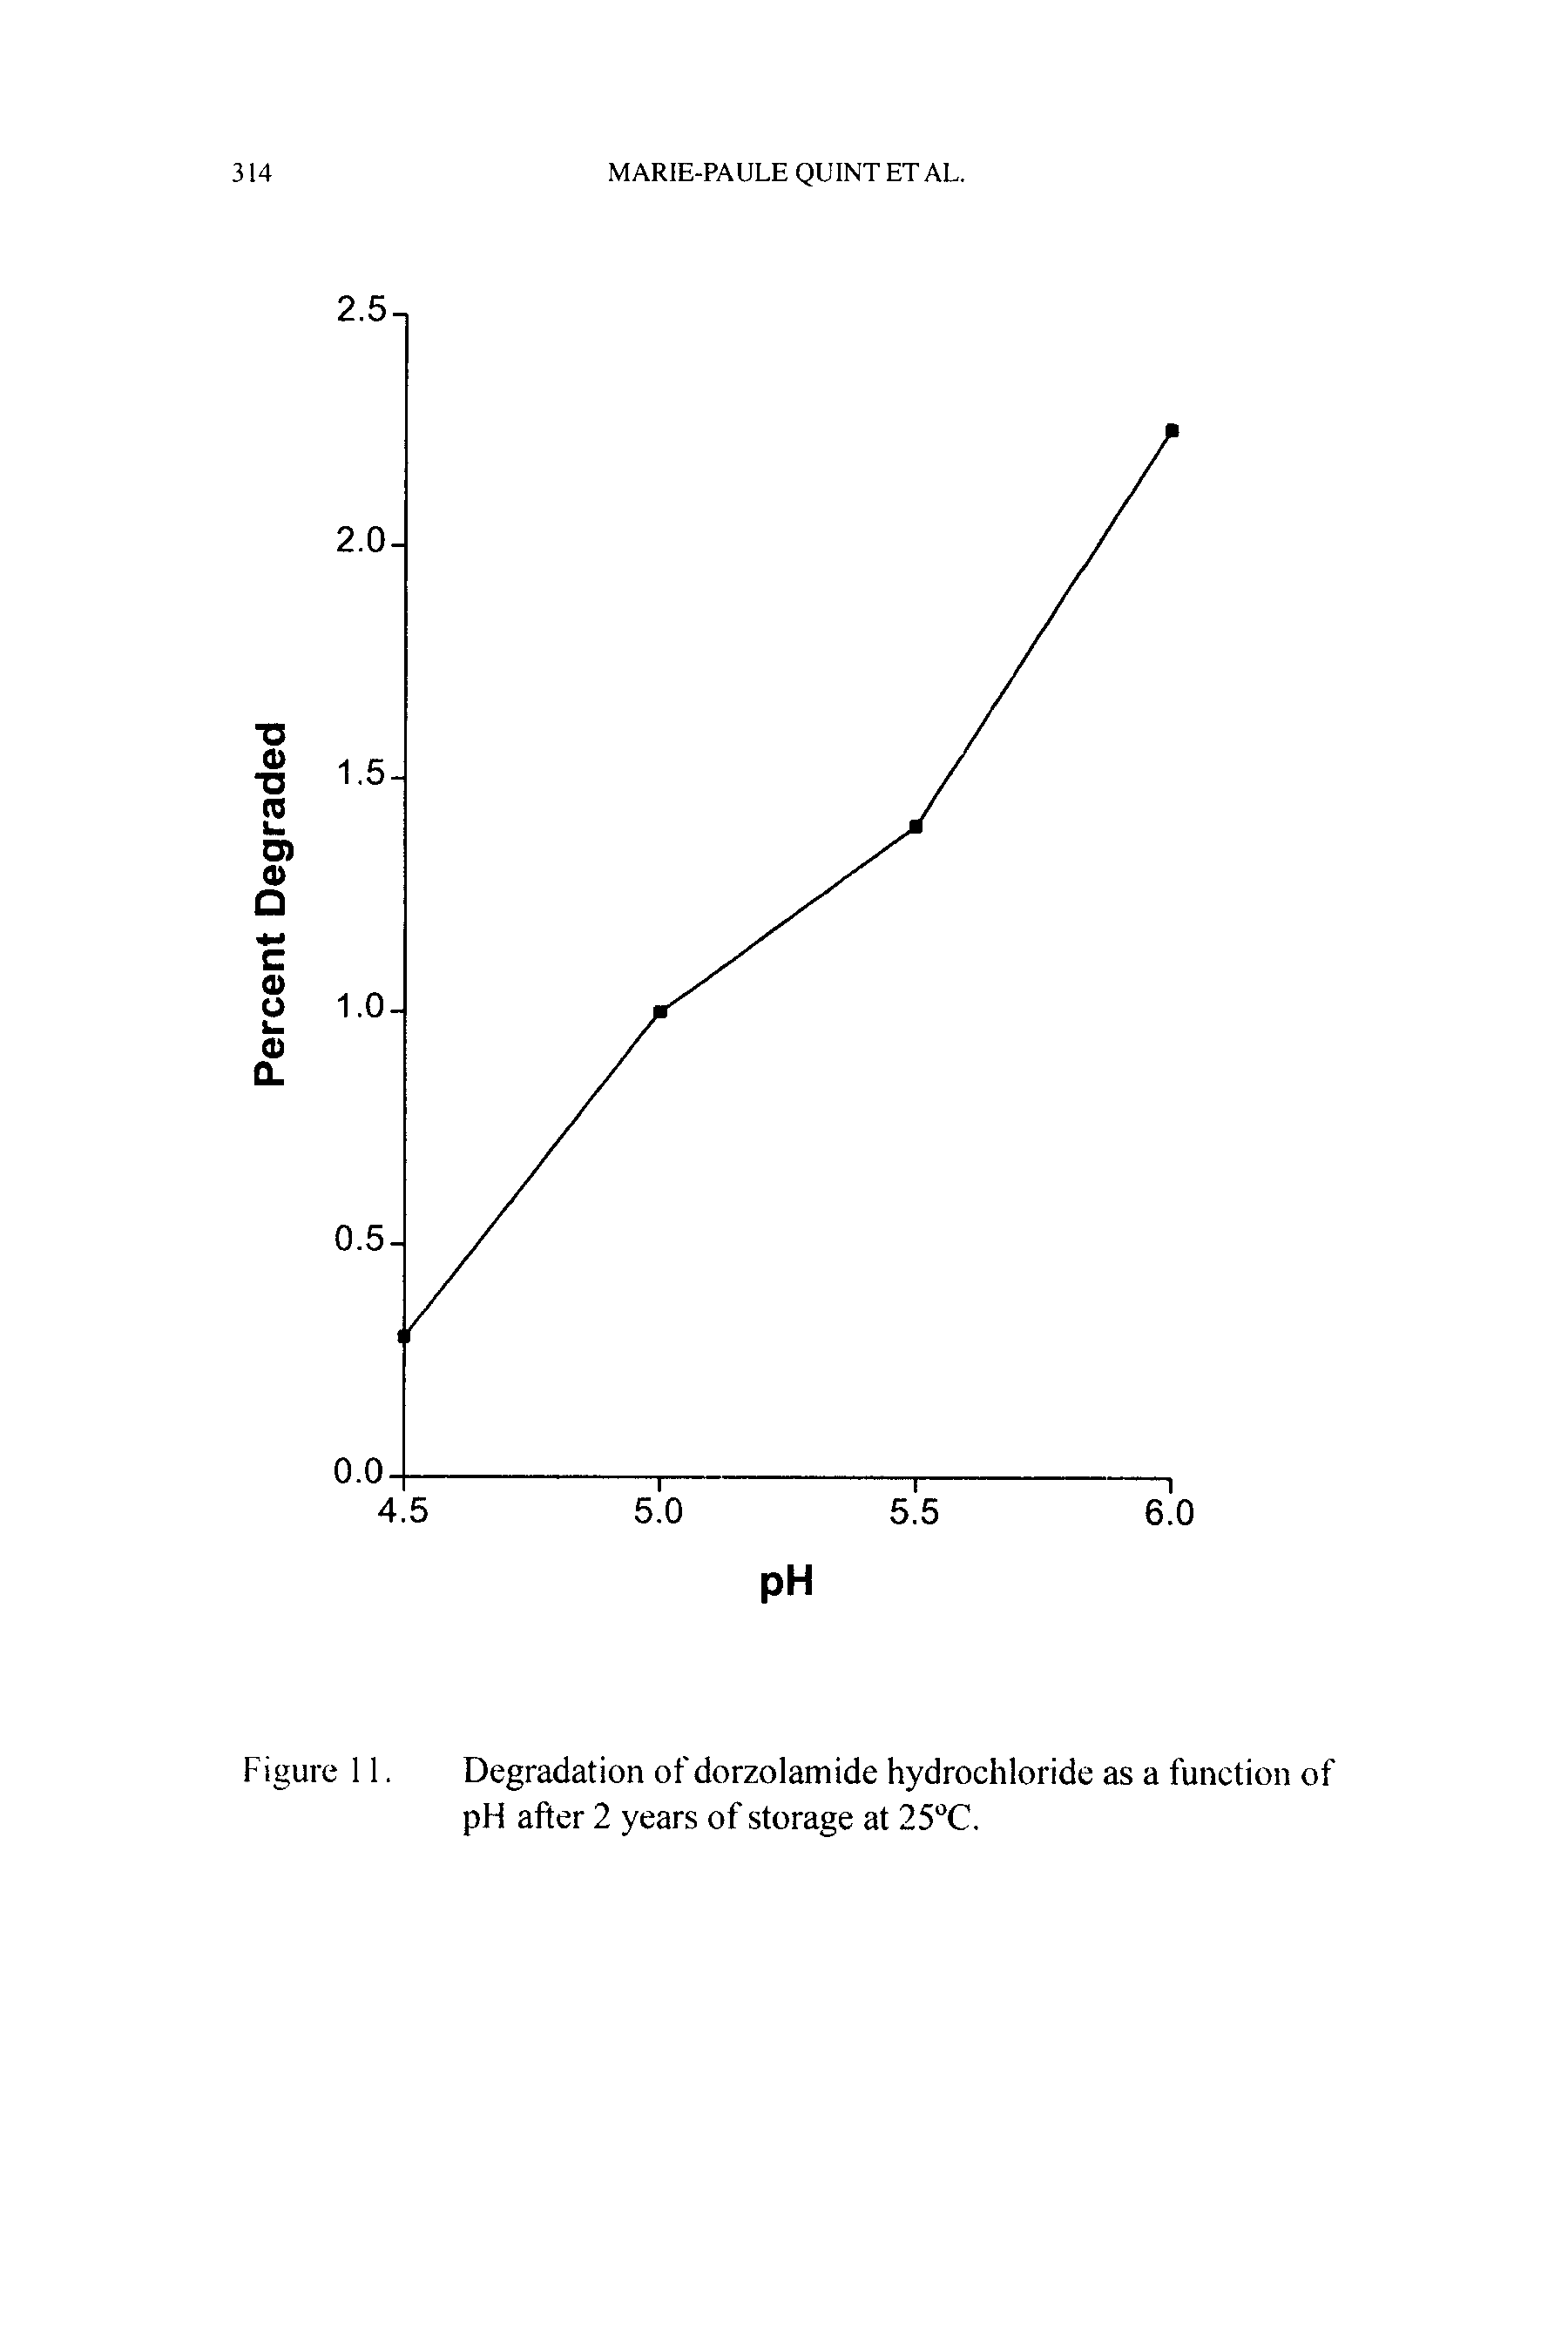 Figure 11. Degradation of dorzolamide hydrochloride as a function of pH after 2 years of storage at 25"C,...